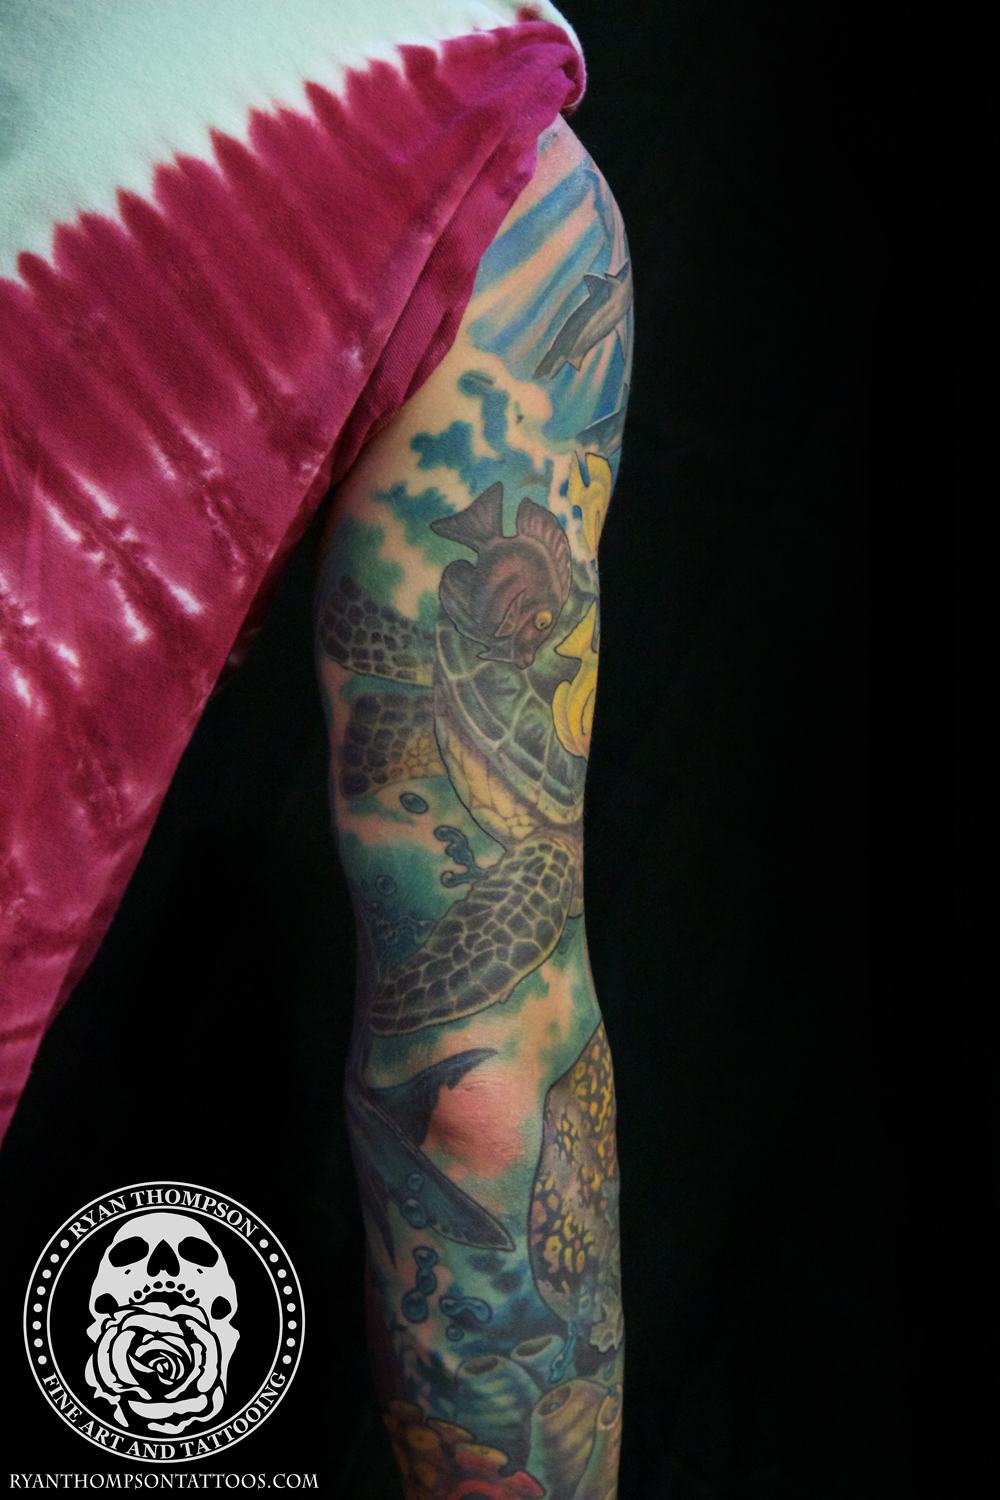 INK ASSASSINS TATTOOS  PIERCINGS  Crazy cool underwater sleeve getting  one more